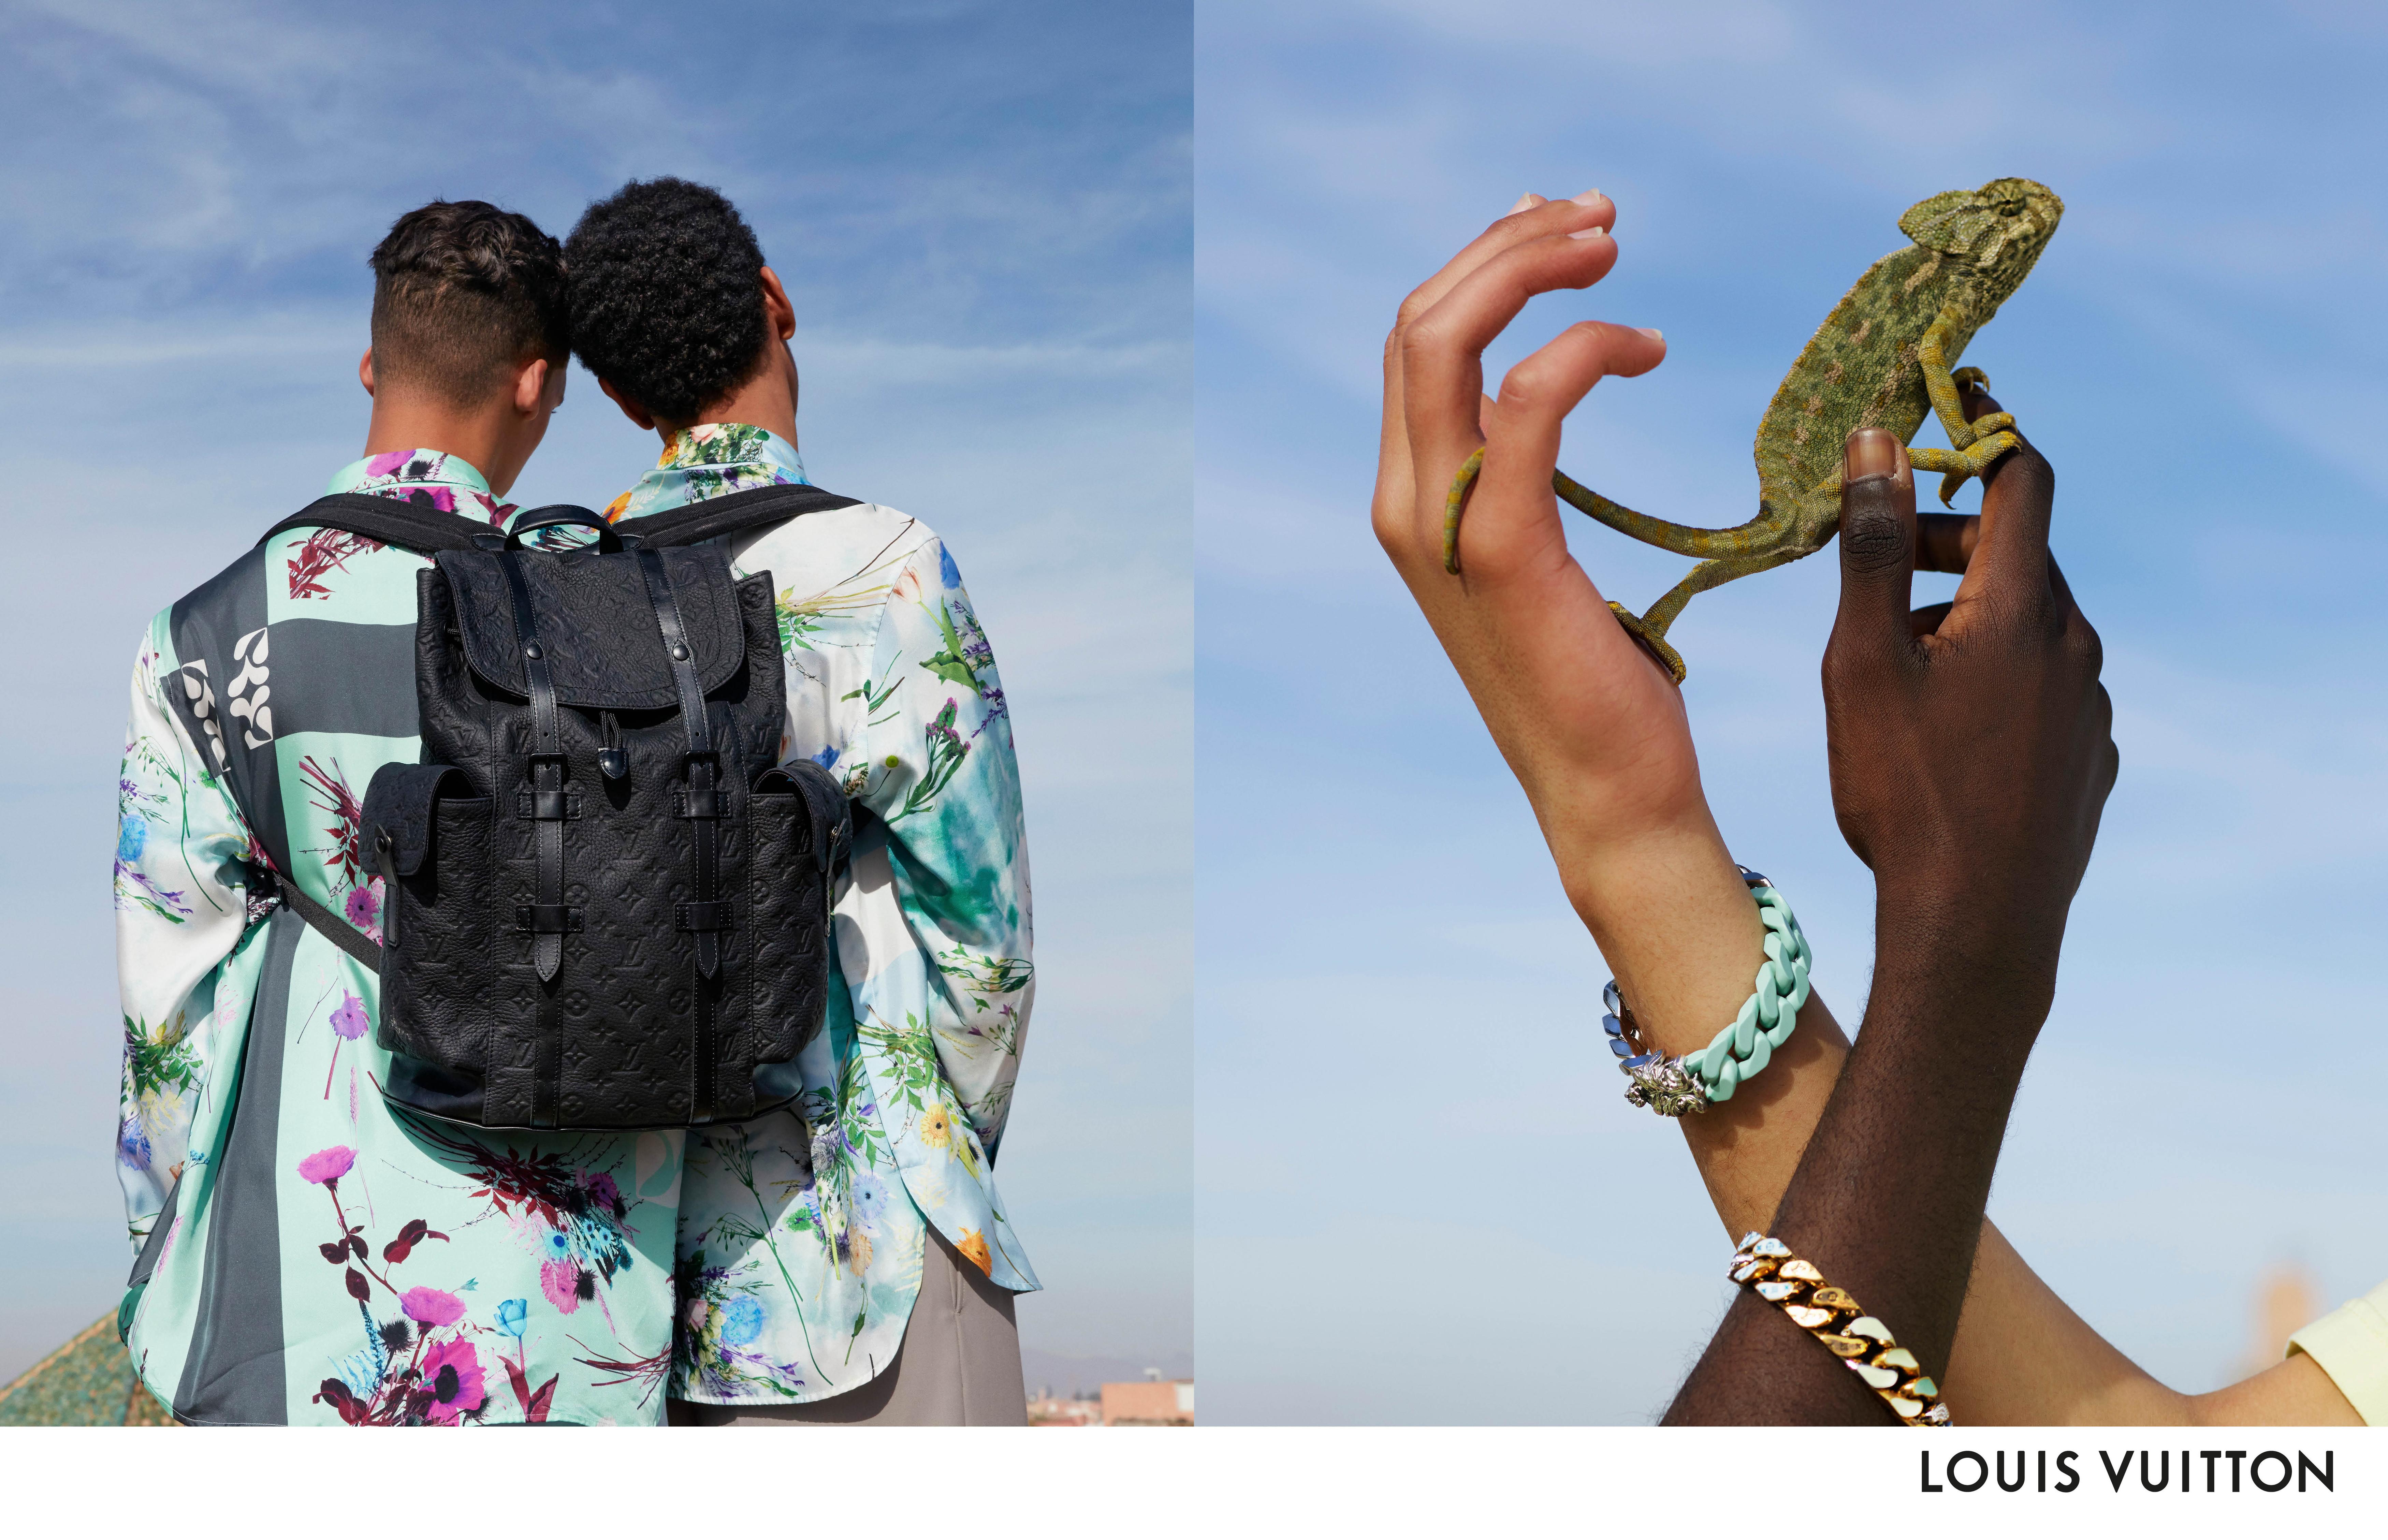 Louis Vuitton SS19 Phase III Campaign - Be Good Studios